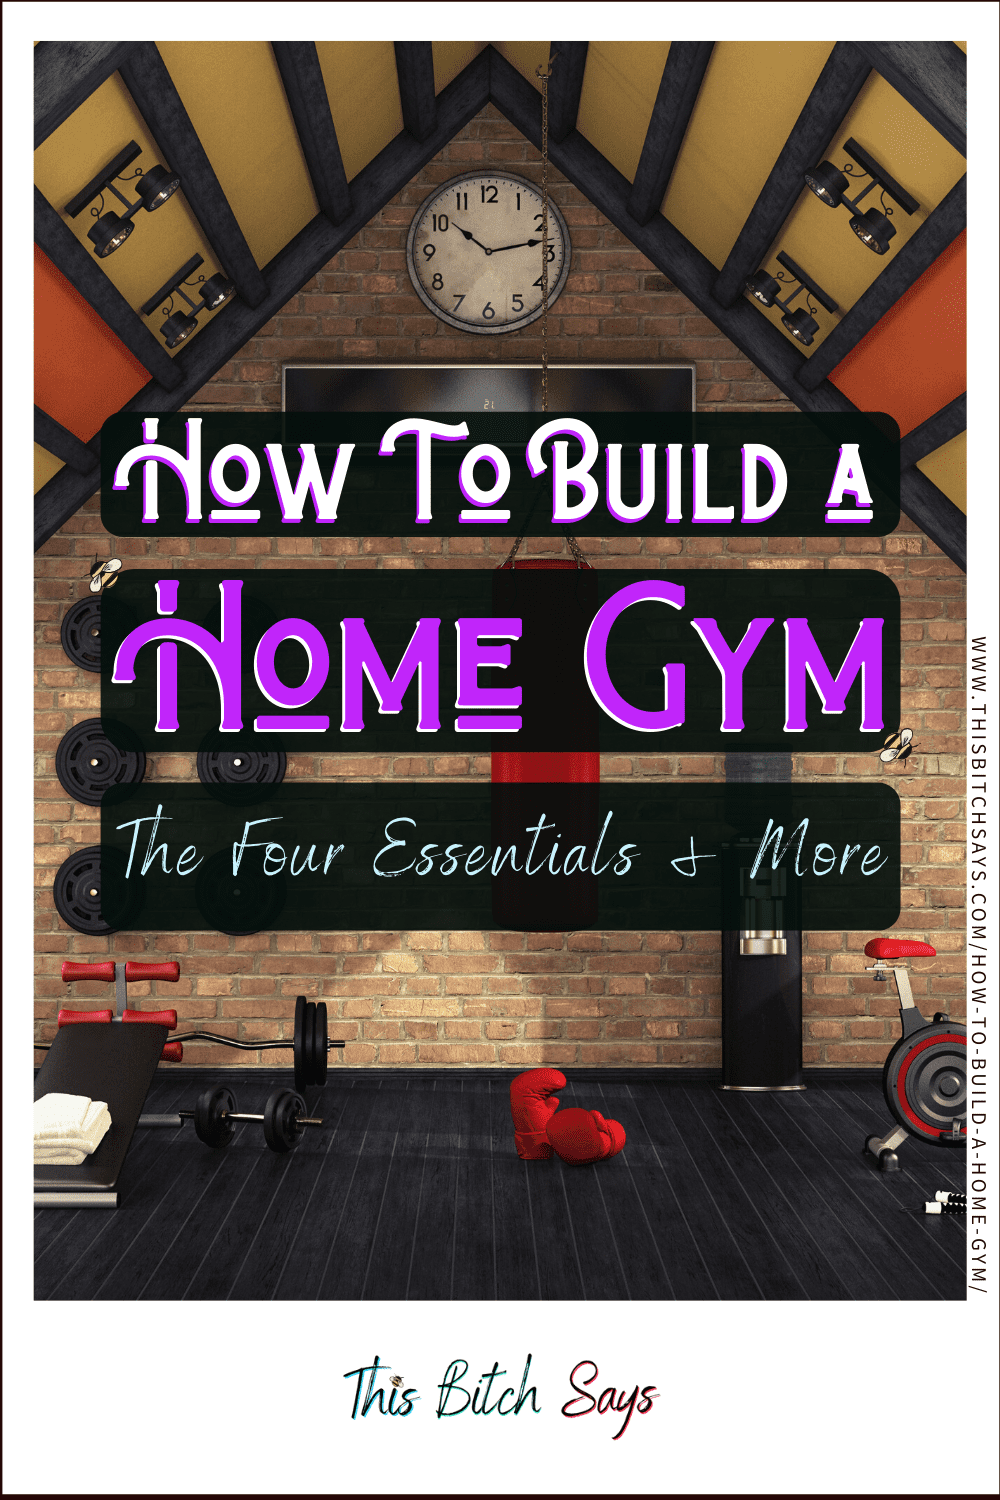 For Your Fitness: how to build a home gym. The four essentials and more.